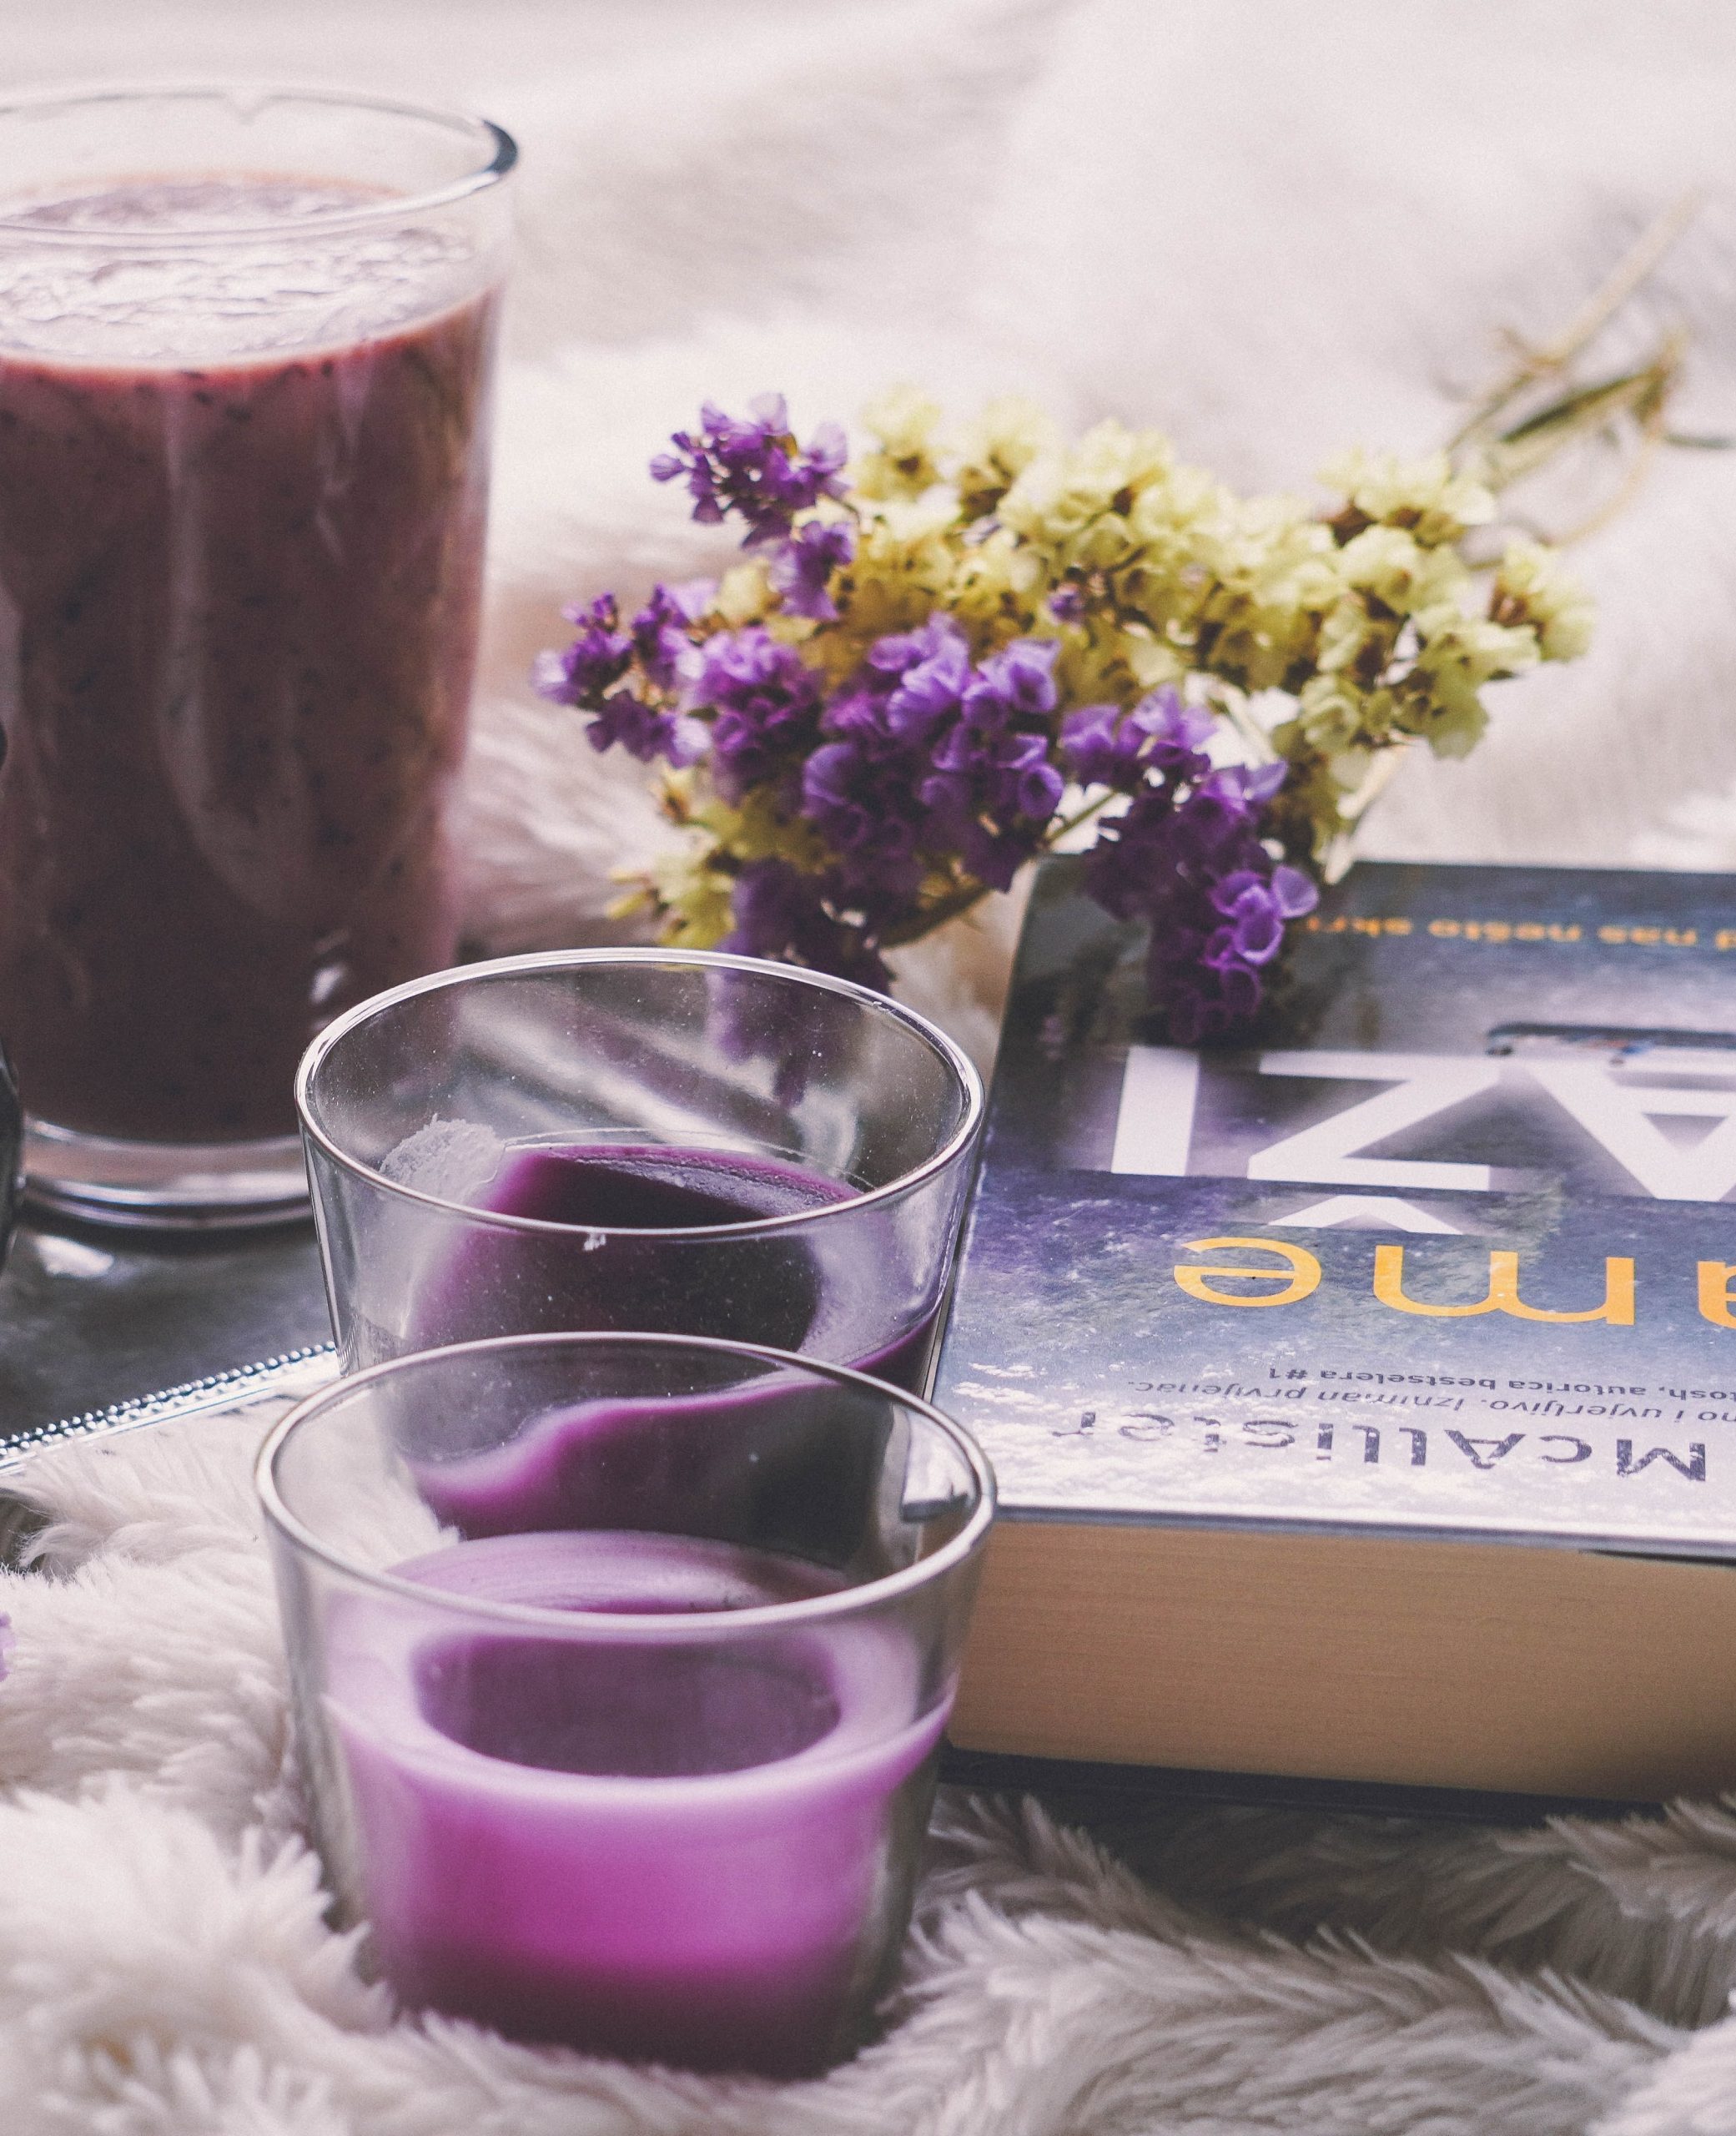 Book with candles, flowers and a smoothie